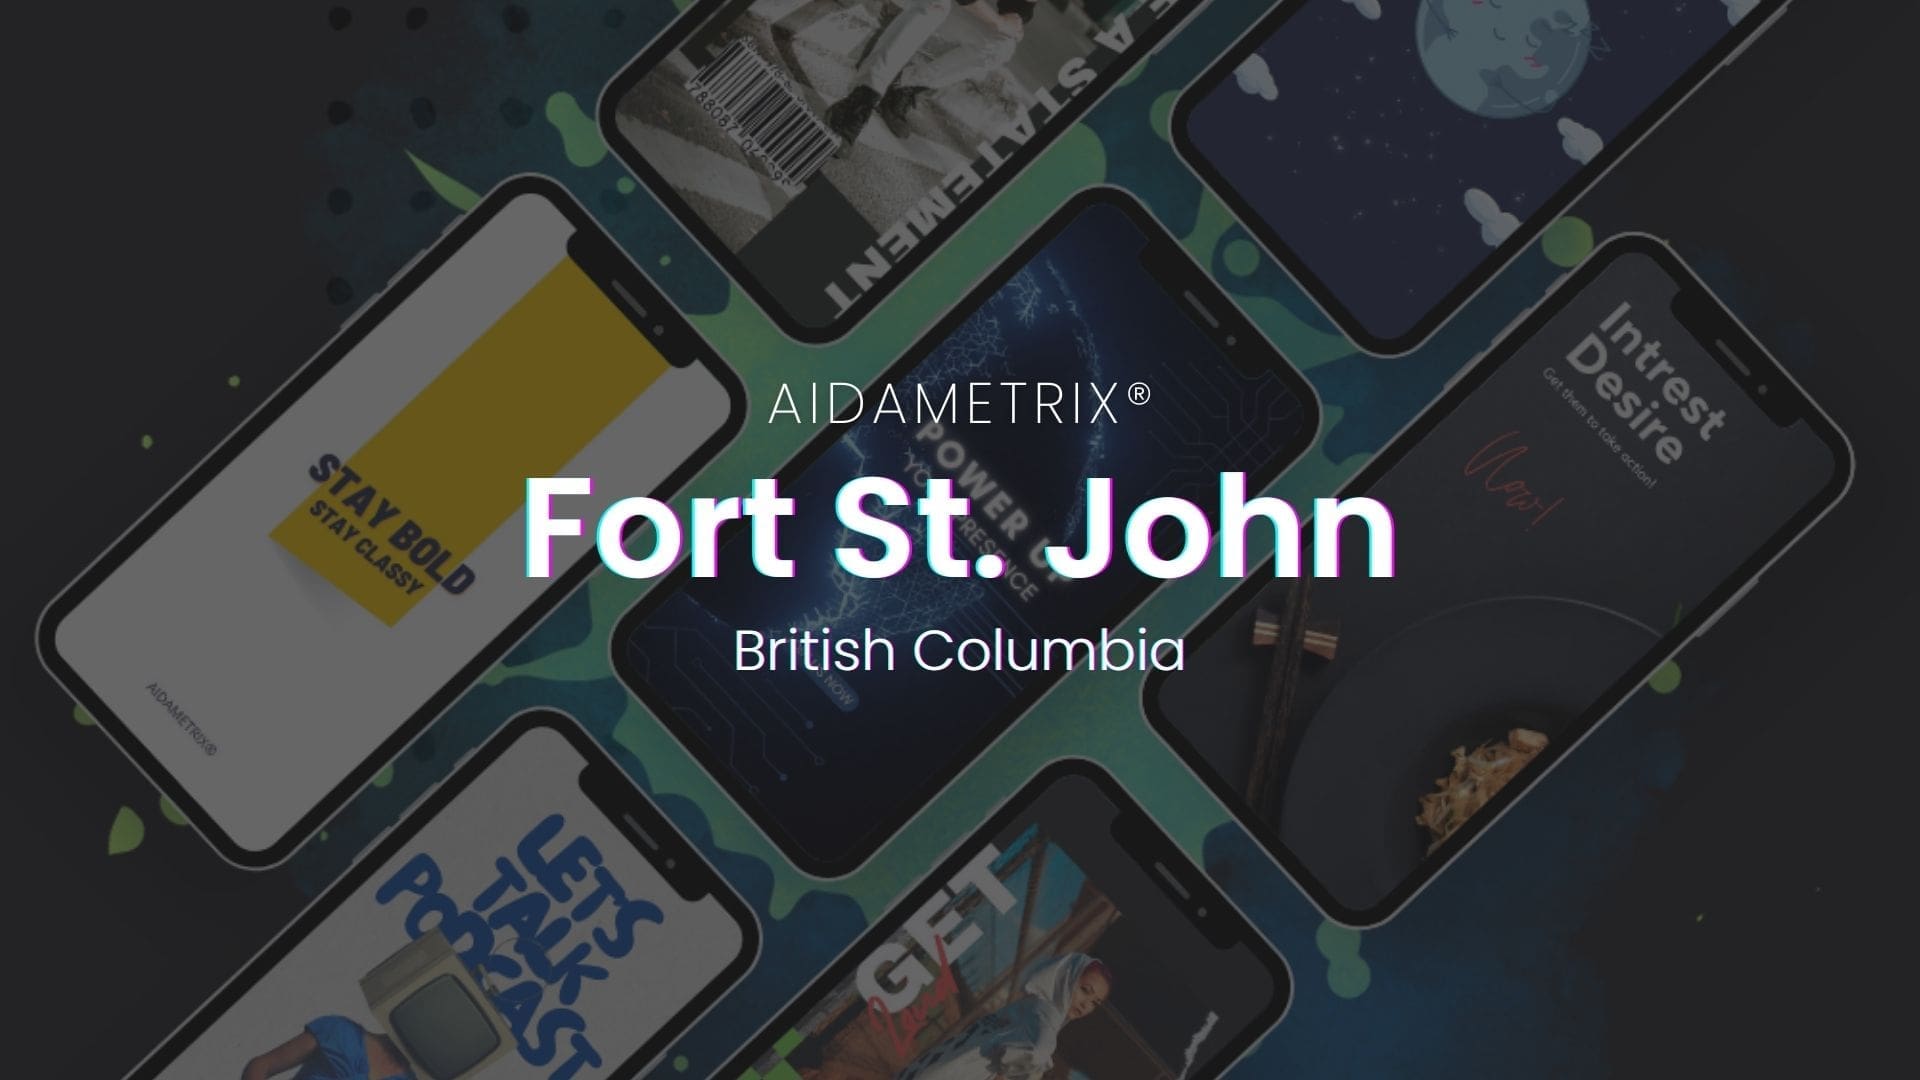 Image showing the Fort St. John, BC location of our Digital Marketing and Web Development / Web Design Agency